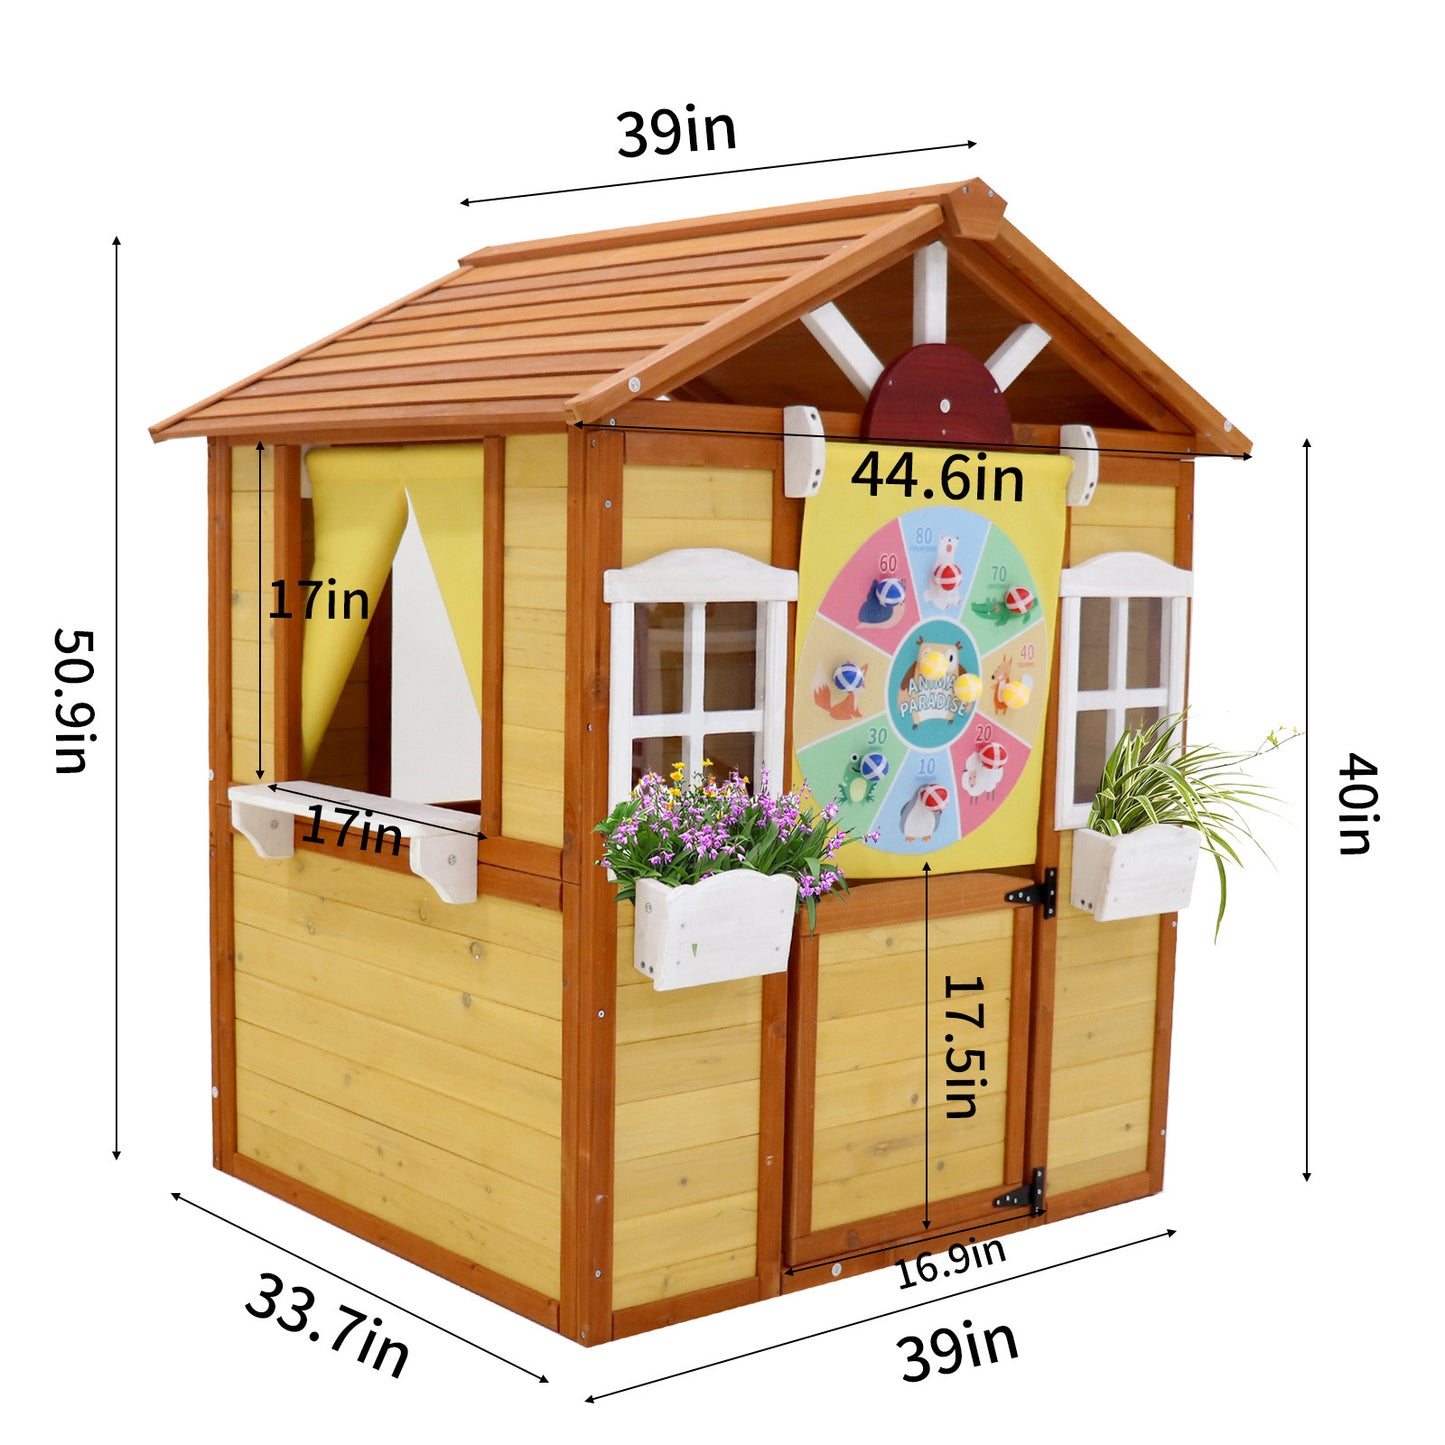 Outdoor Playhouse for Kids Wooden Cottage with Working Doors Windows Pretend Play House for Age 3-8 Years